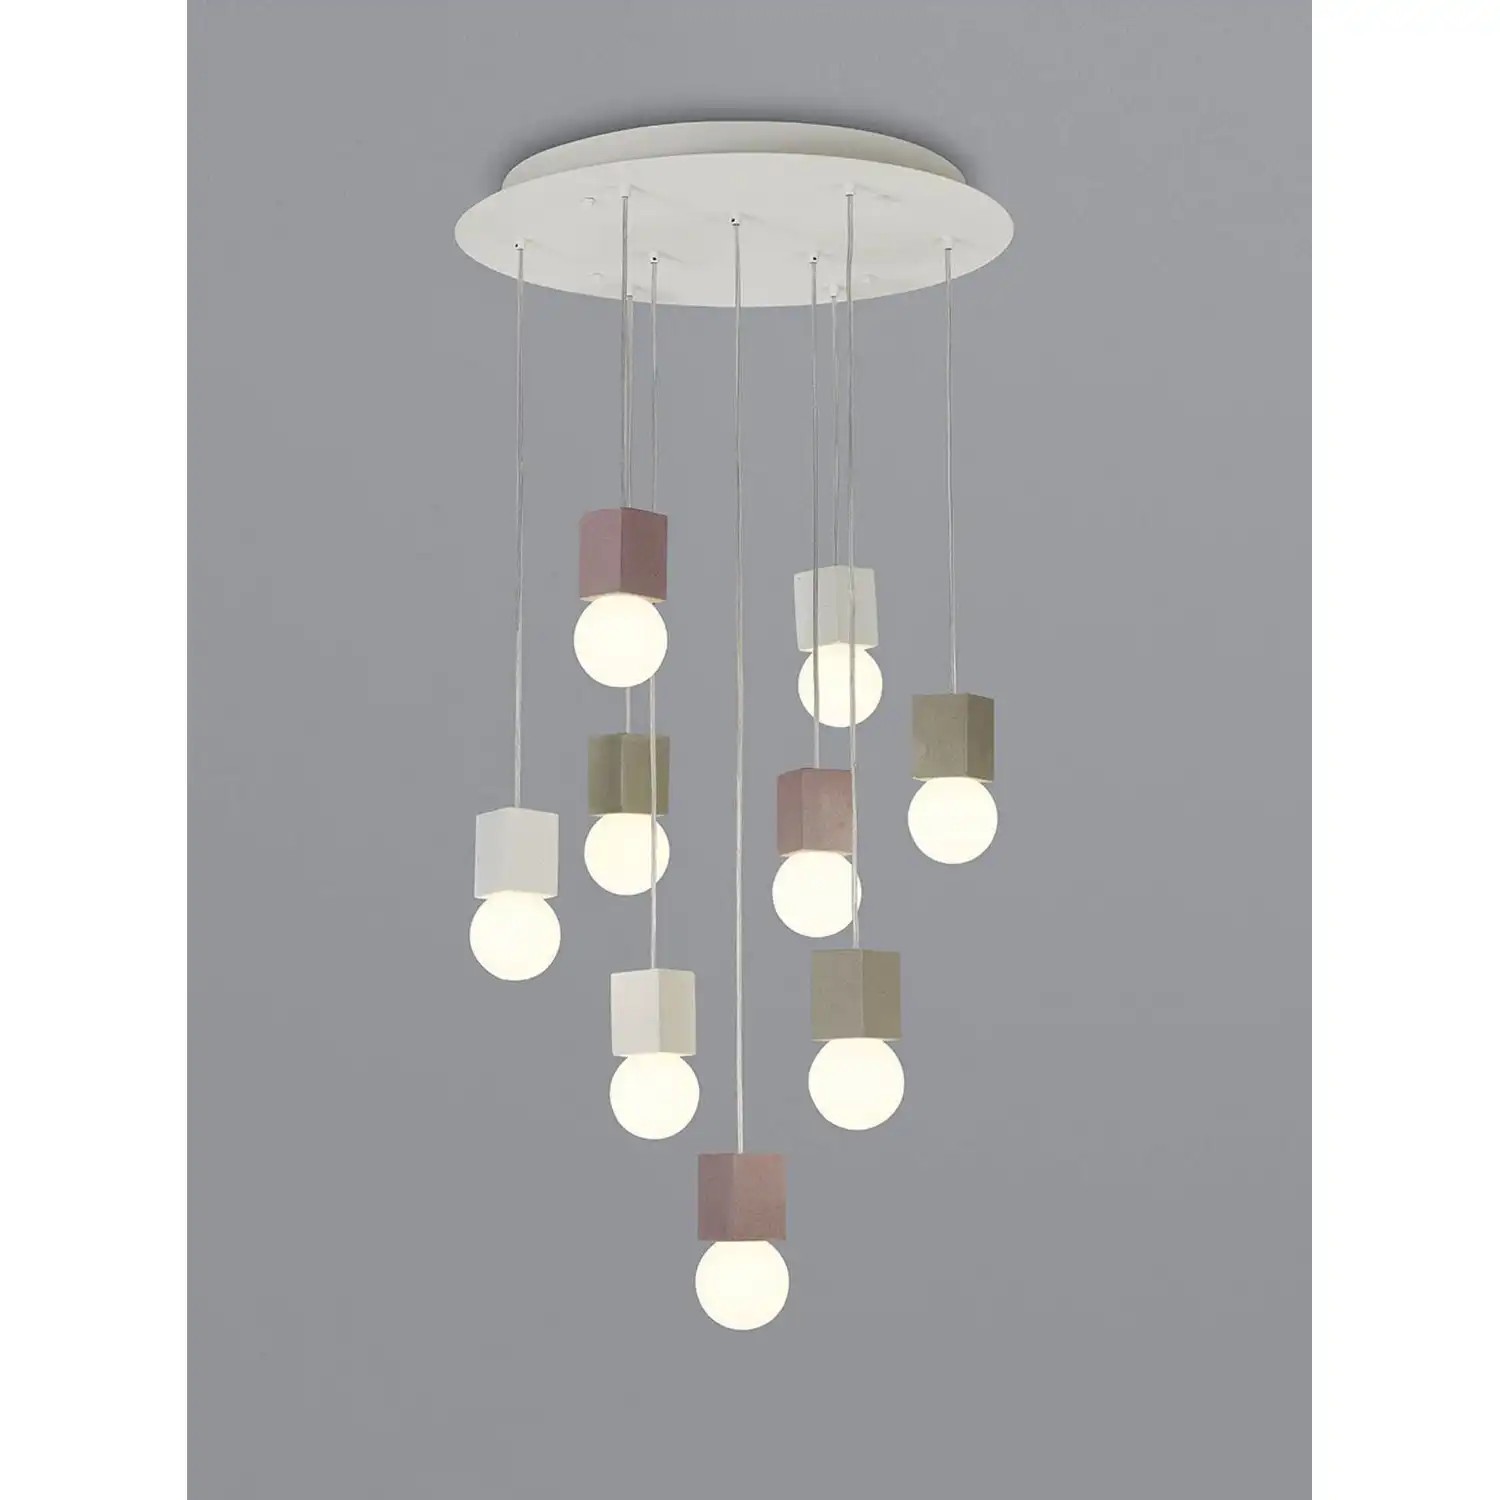 Galaxia Pendant Square, 9 Light E27, White Grey Red Cement, White Base And Cable